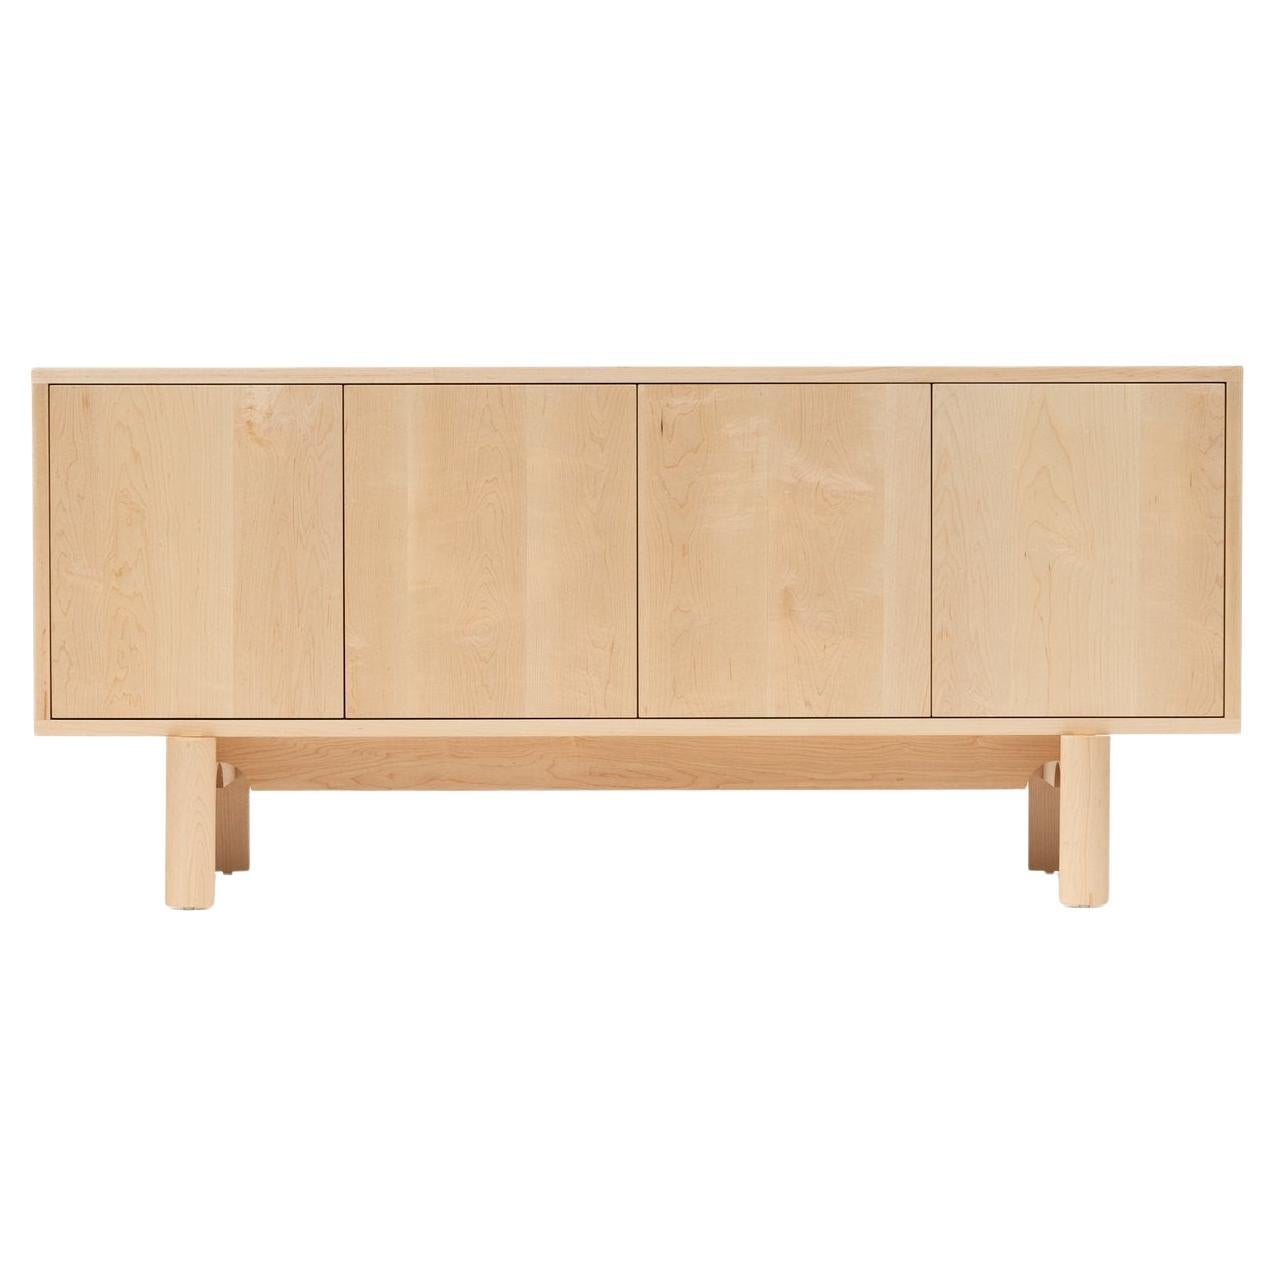 Brower Credenza by De JONG & Co. For Sale